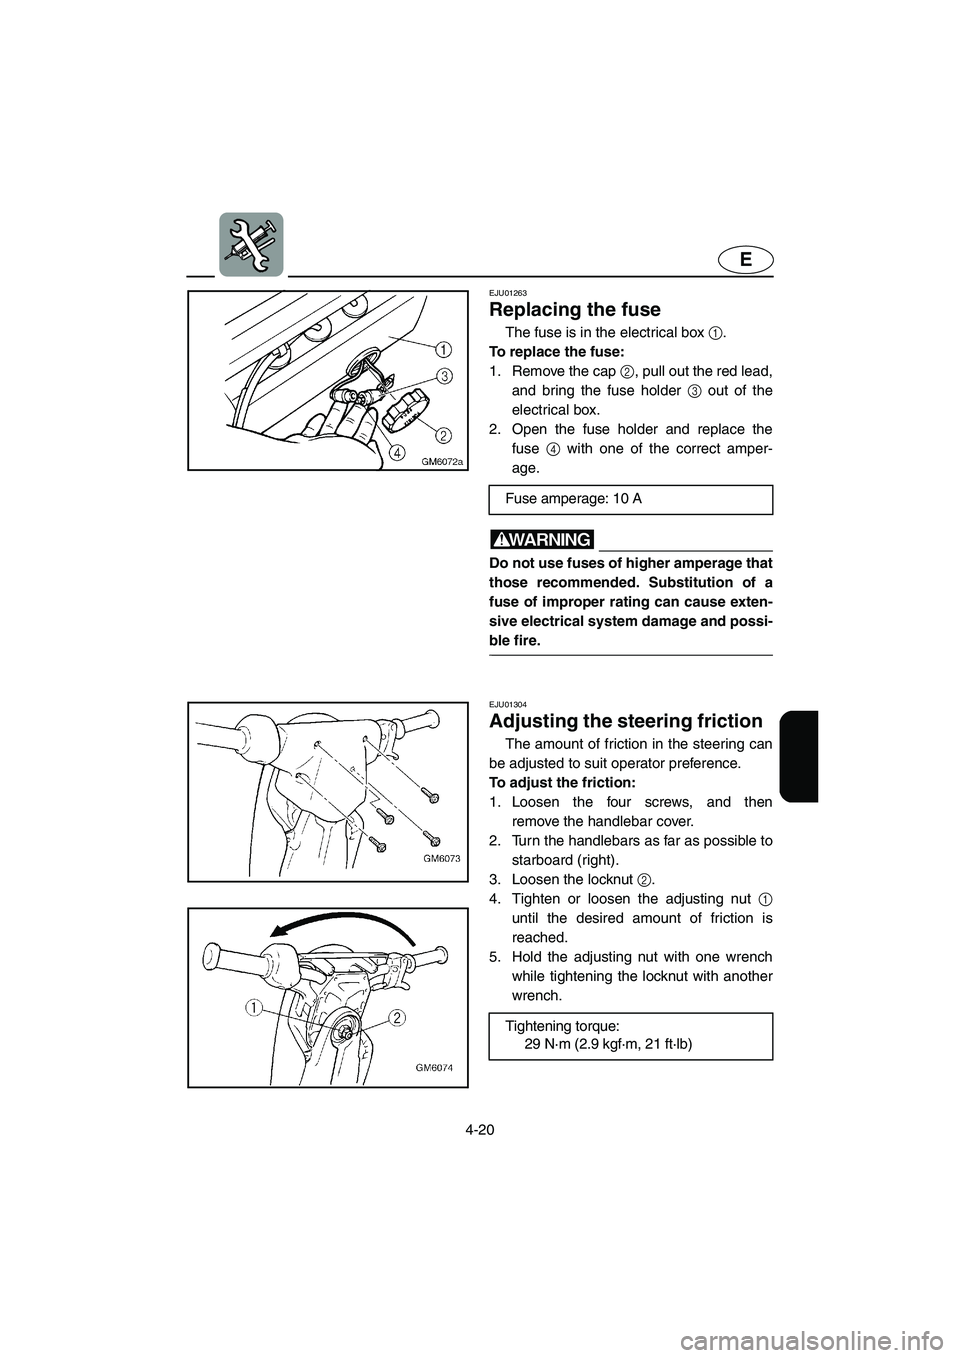 YAMAHA SUPERJET 2002  Owners Manual 4-20
E
EJU01263 
Replacing the fuse  
The fuse is in the electrical box 1. 
To replace the fuse: 
1. Remove the cap 2, pull out the red lead,
and bring the fuse holder 3 out of the
electrical box. 
2.